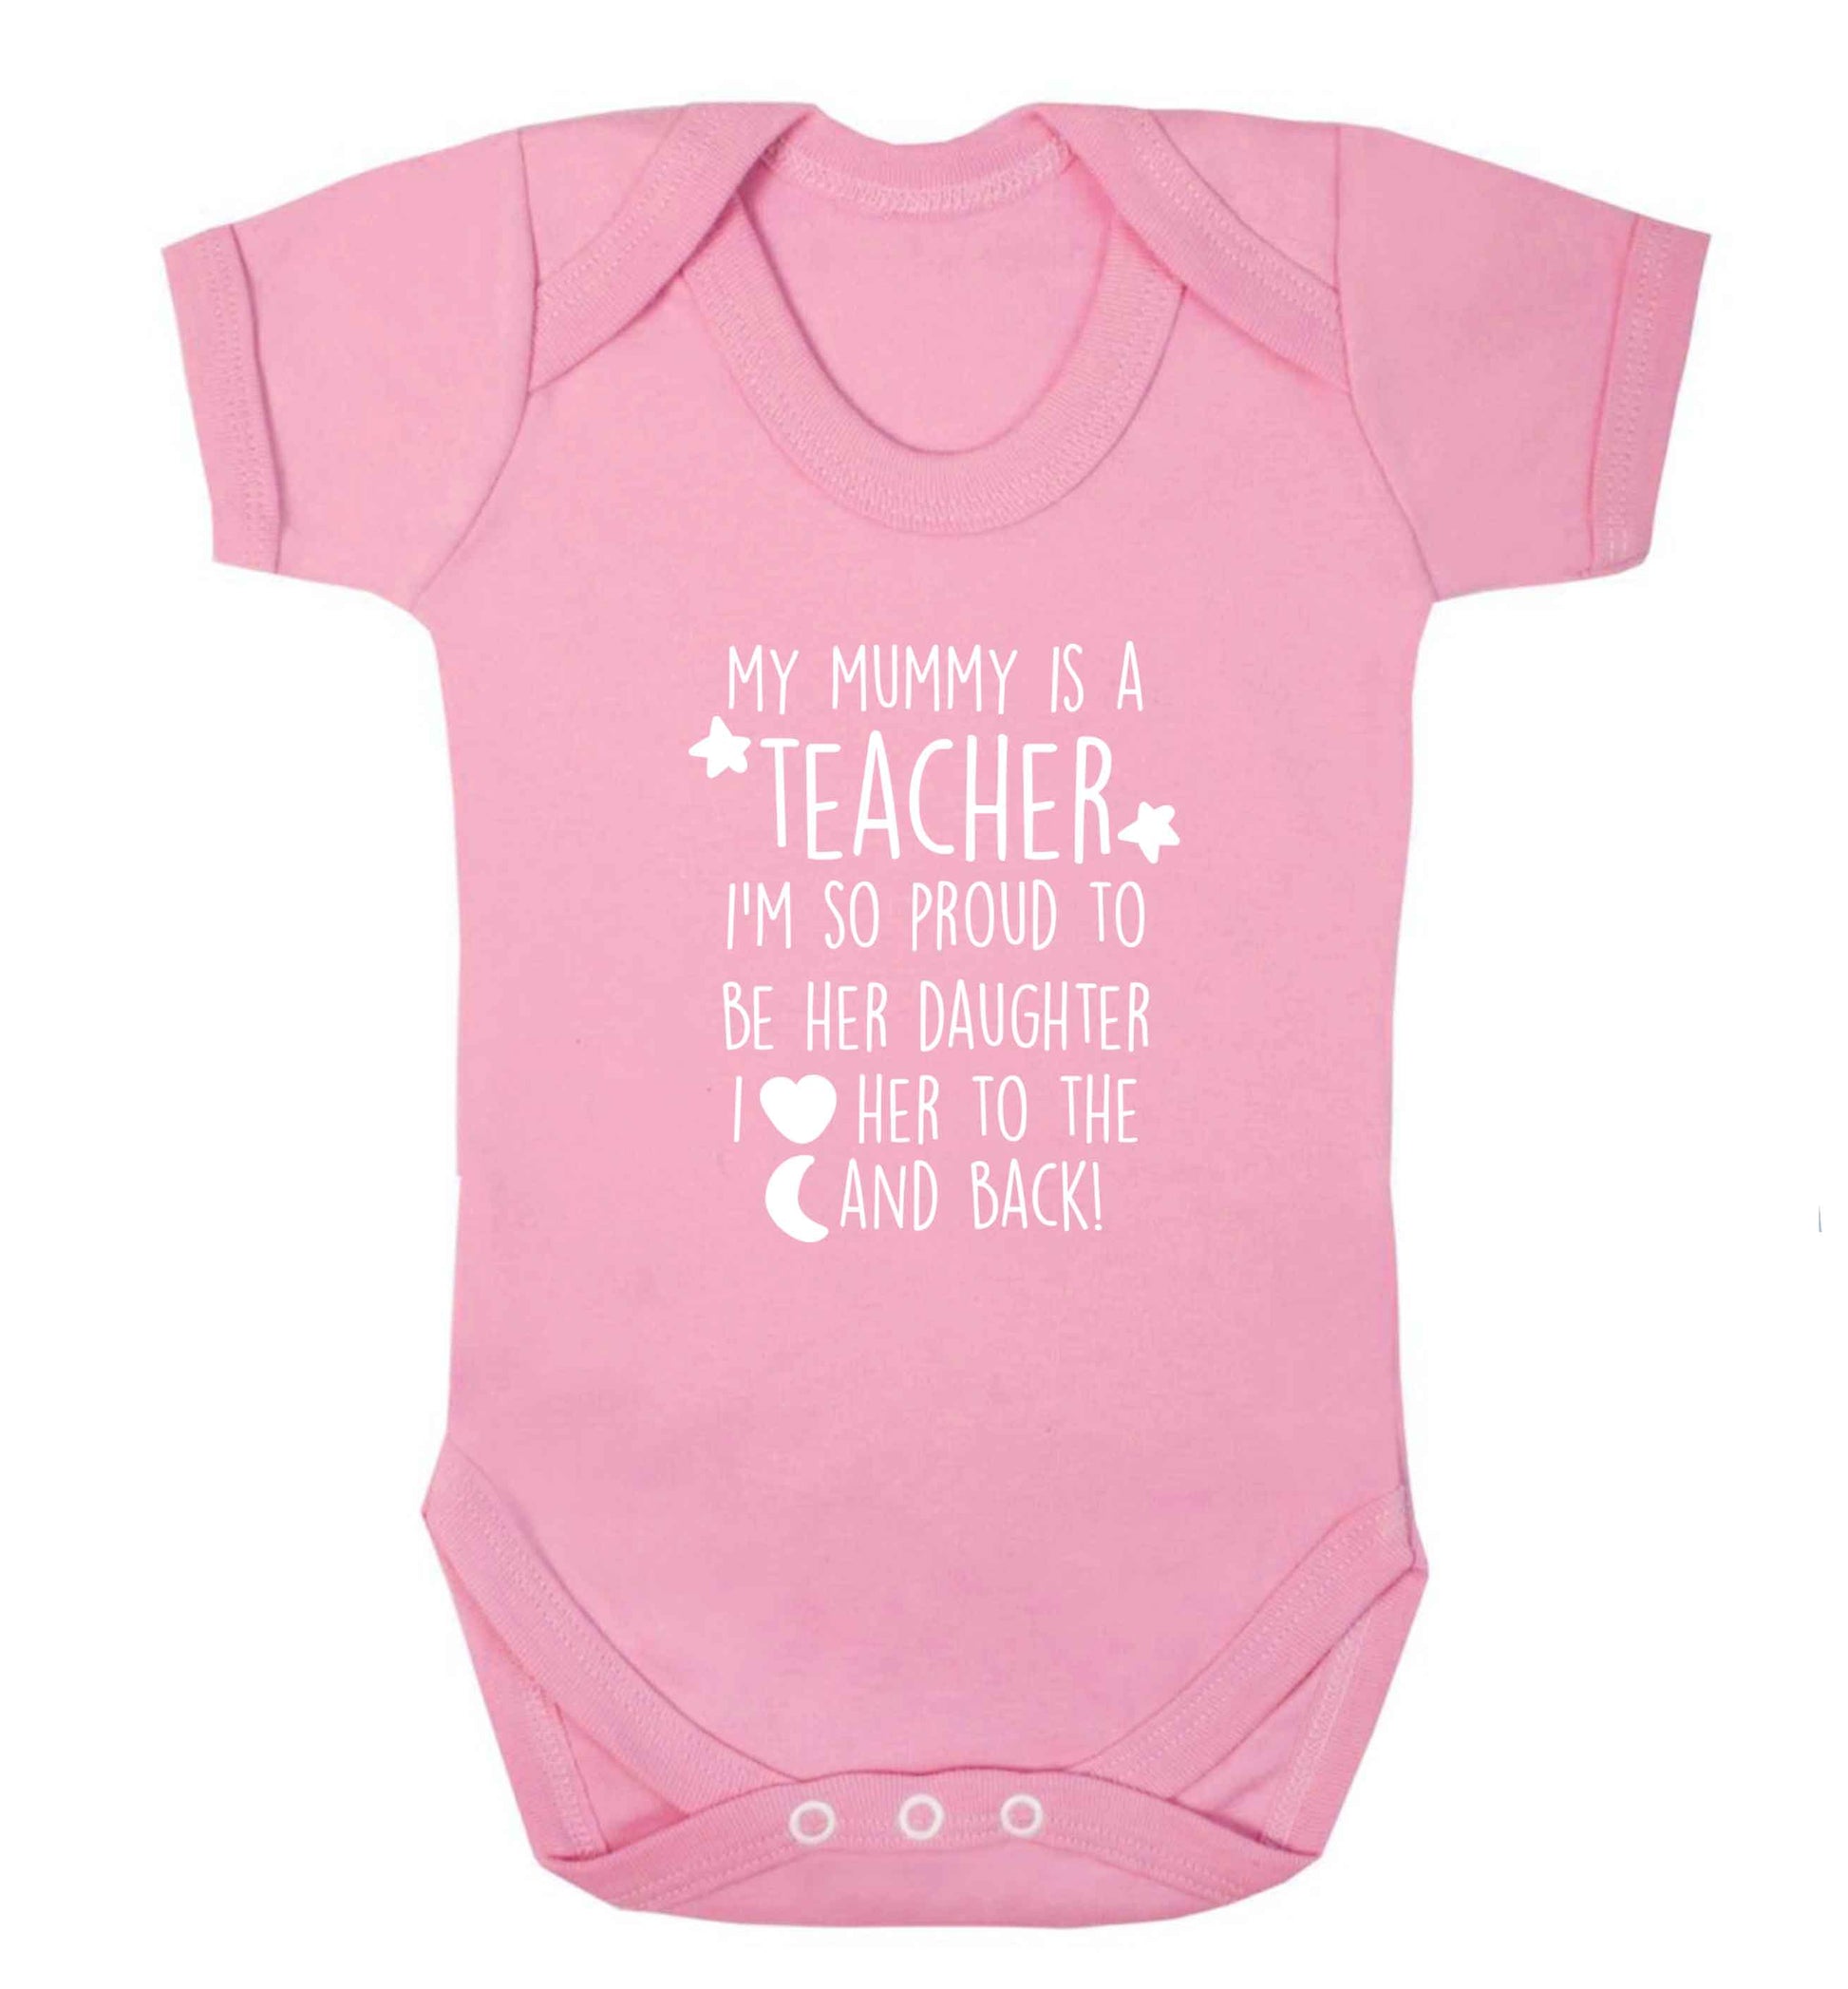 My mummy is a teacher I'm so proud to be her daughter I love her to the moon and back baby vest pale pink 18-24 months